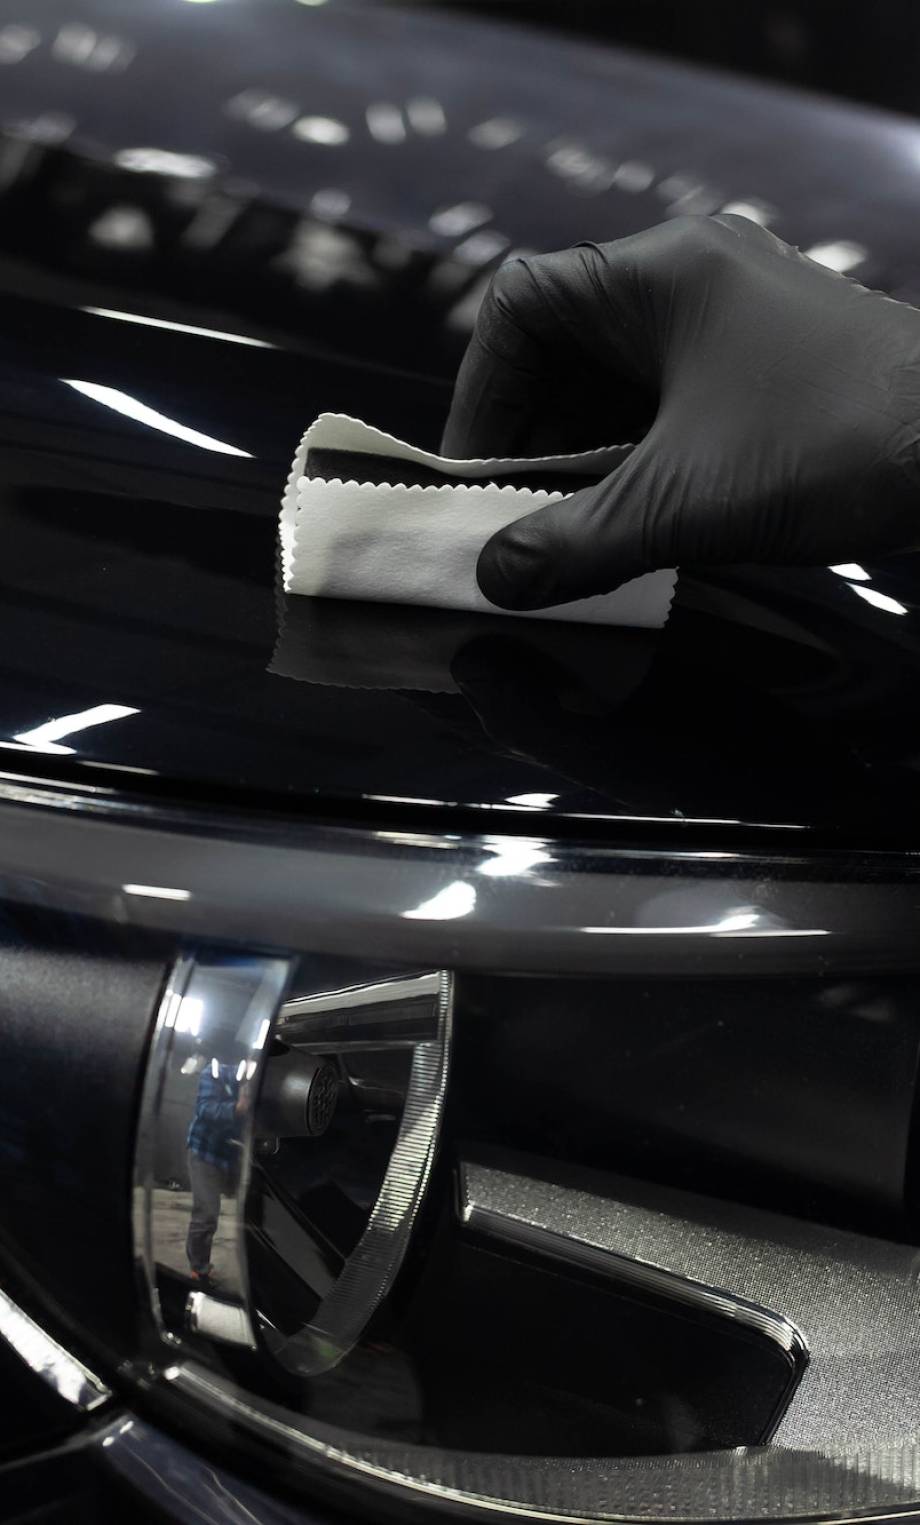 Applying nanoceramics to cars. Car paint protection concept